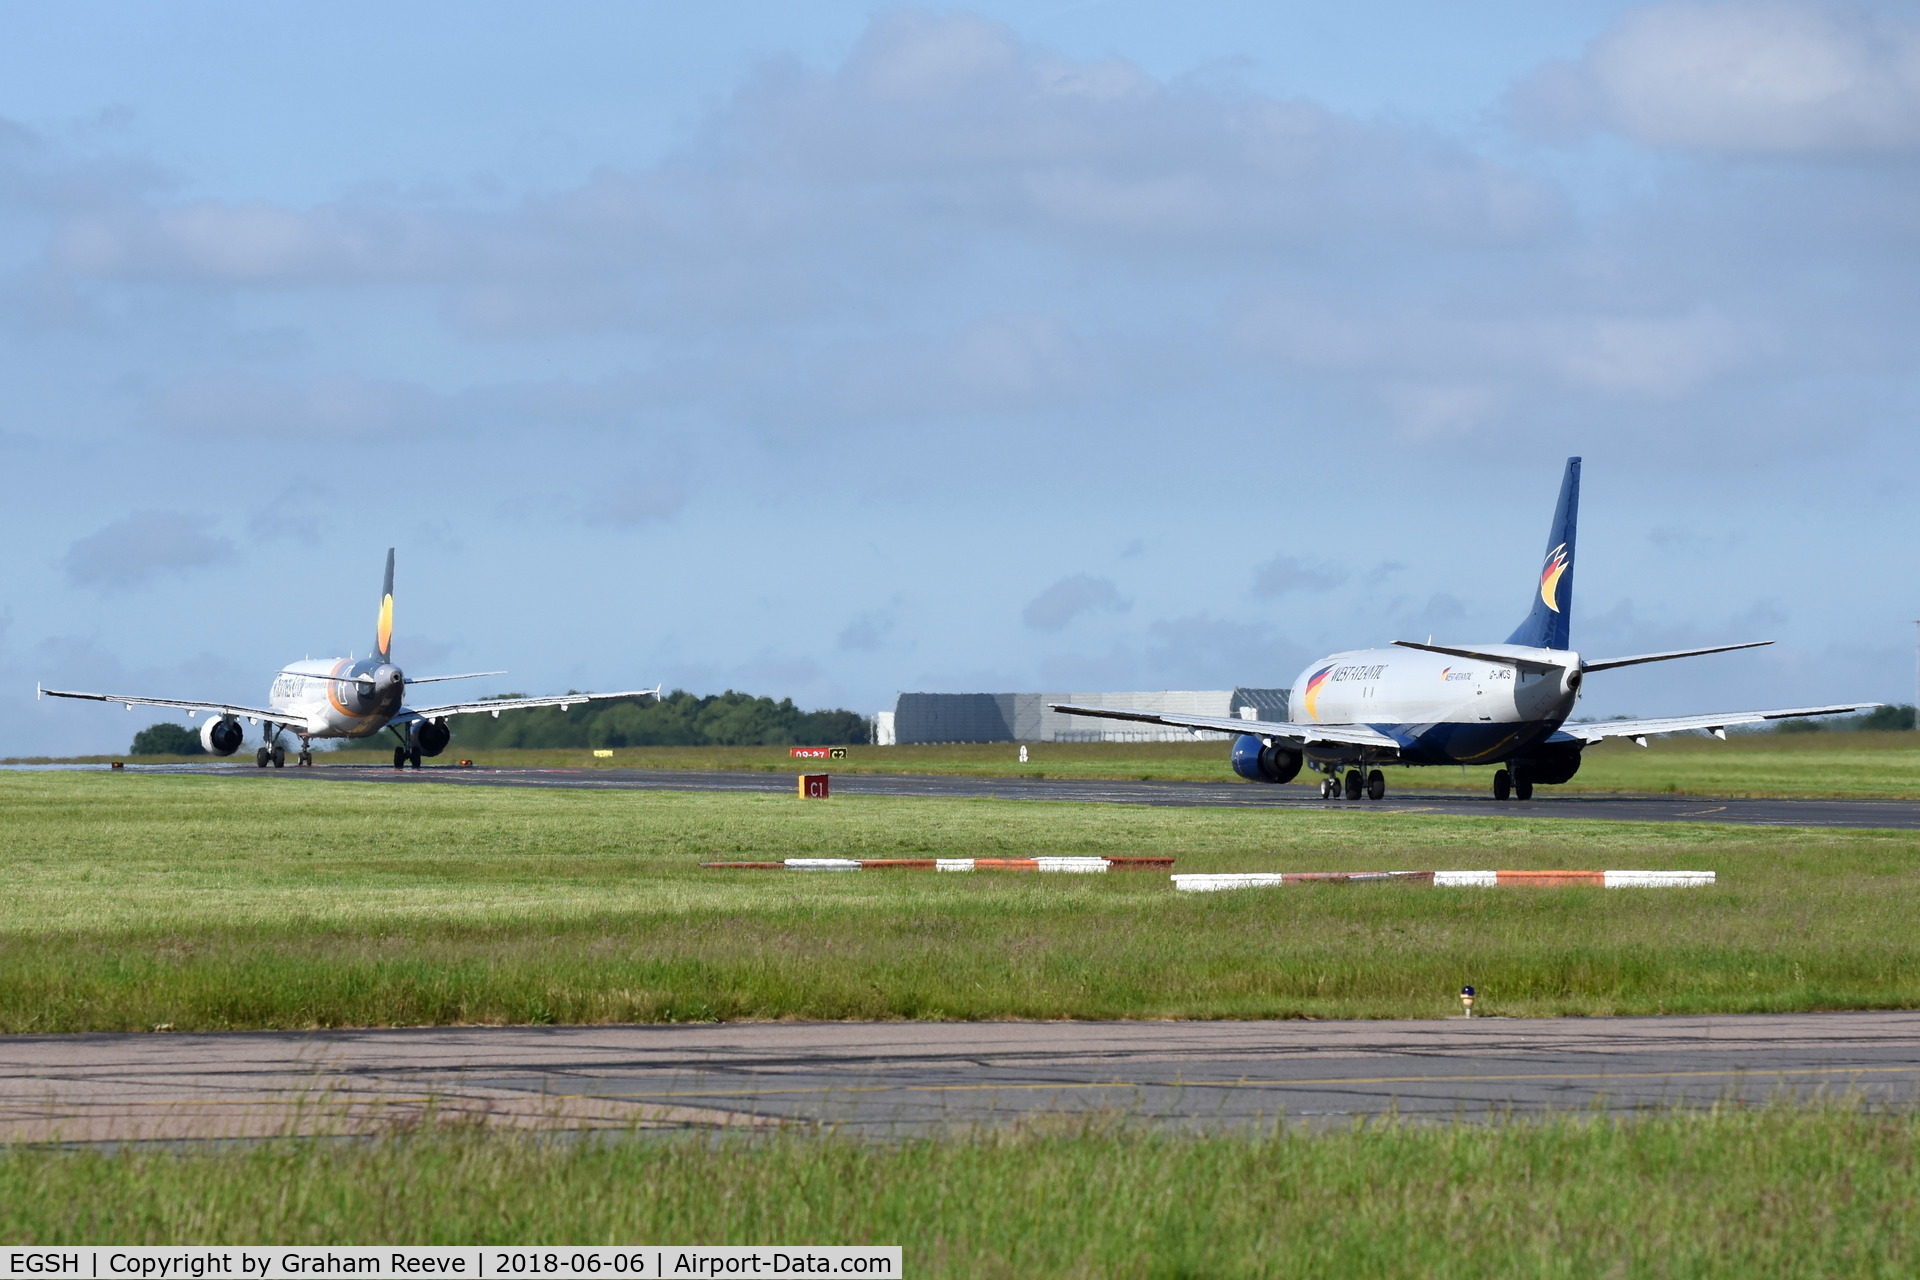 Norwich International Airport, Norwich, England United Kingdom (EGSH) - YL-LCO and G-JMCS both on taxiway Charlie.